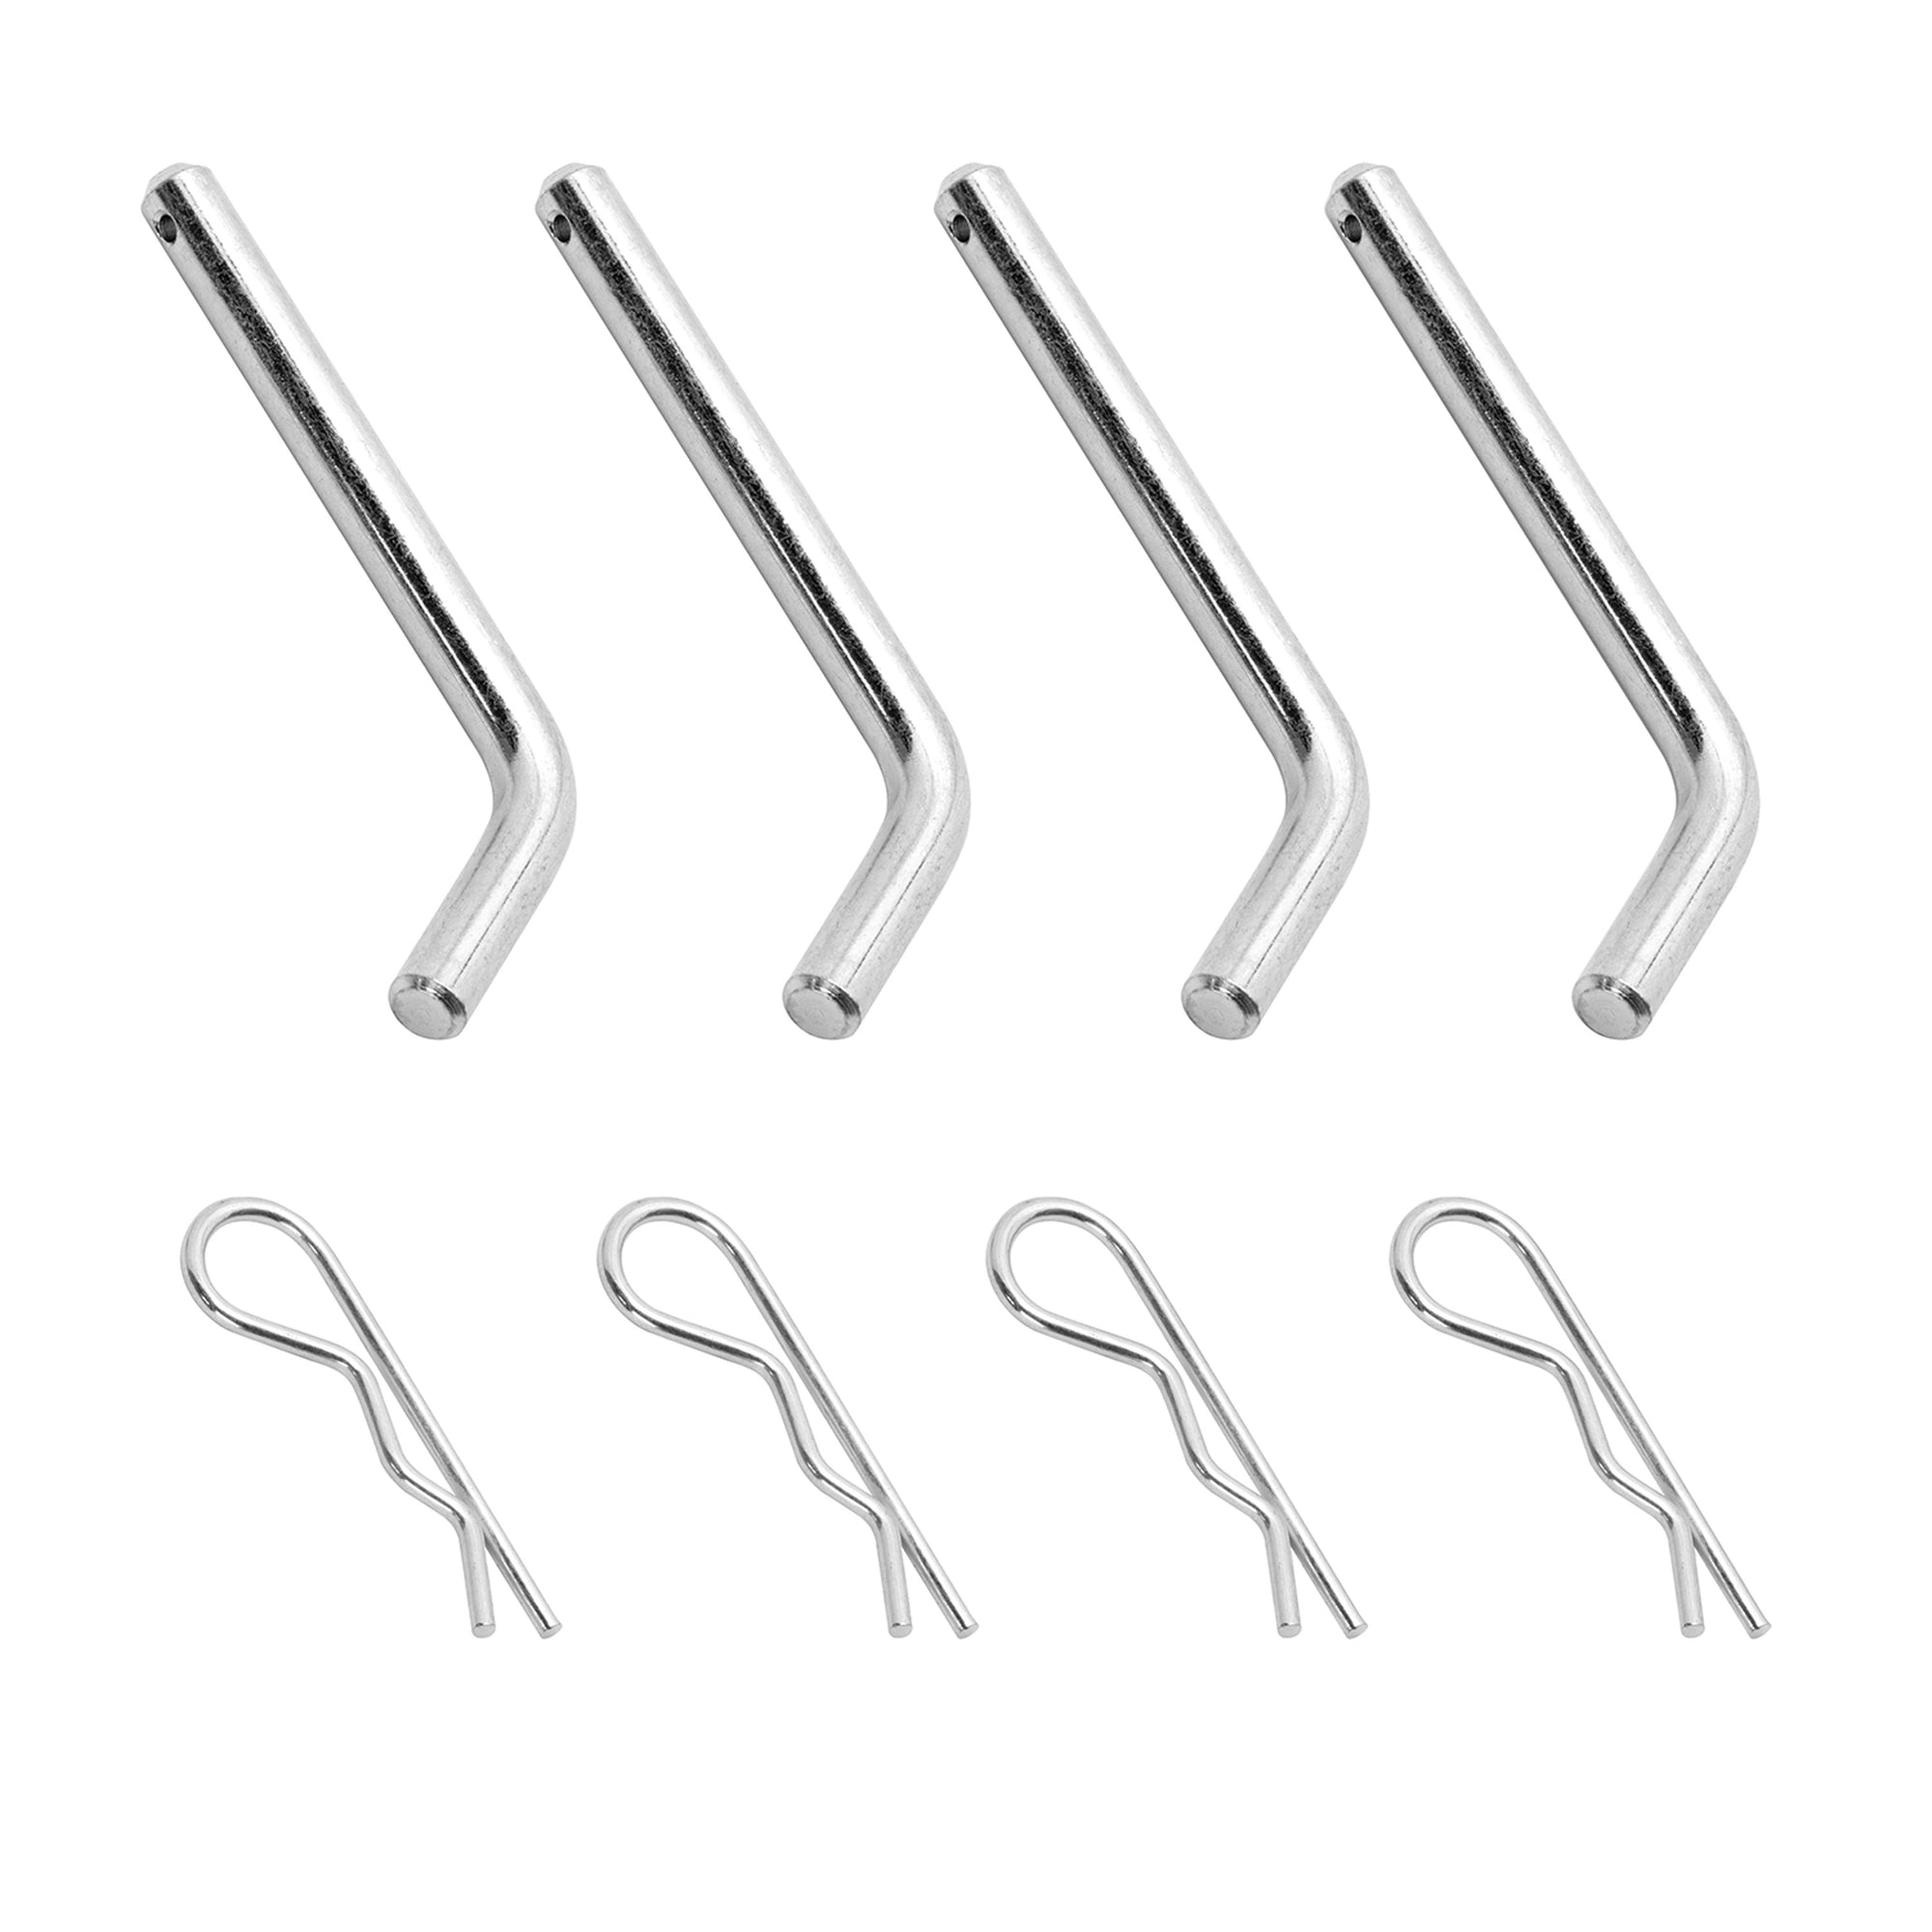 Reese 58467 Mounting Pins and Clips for Fifth Wheel Rails - 1/2" x 4-1/4", Pack of 4